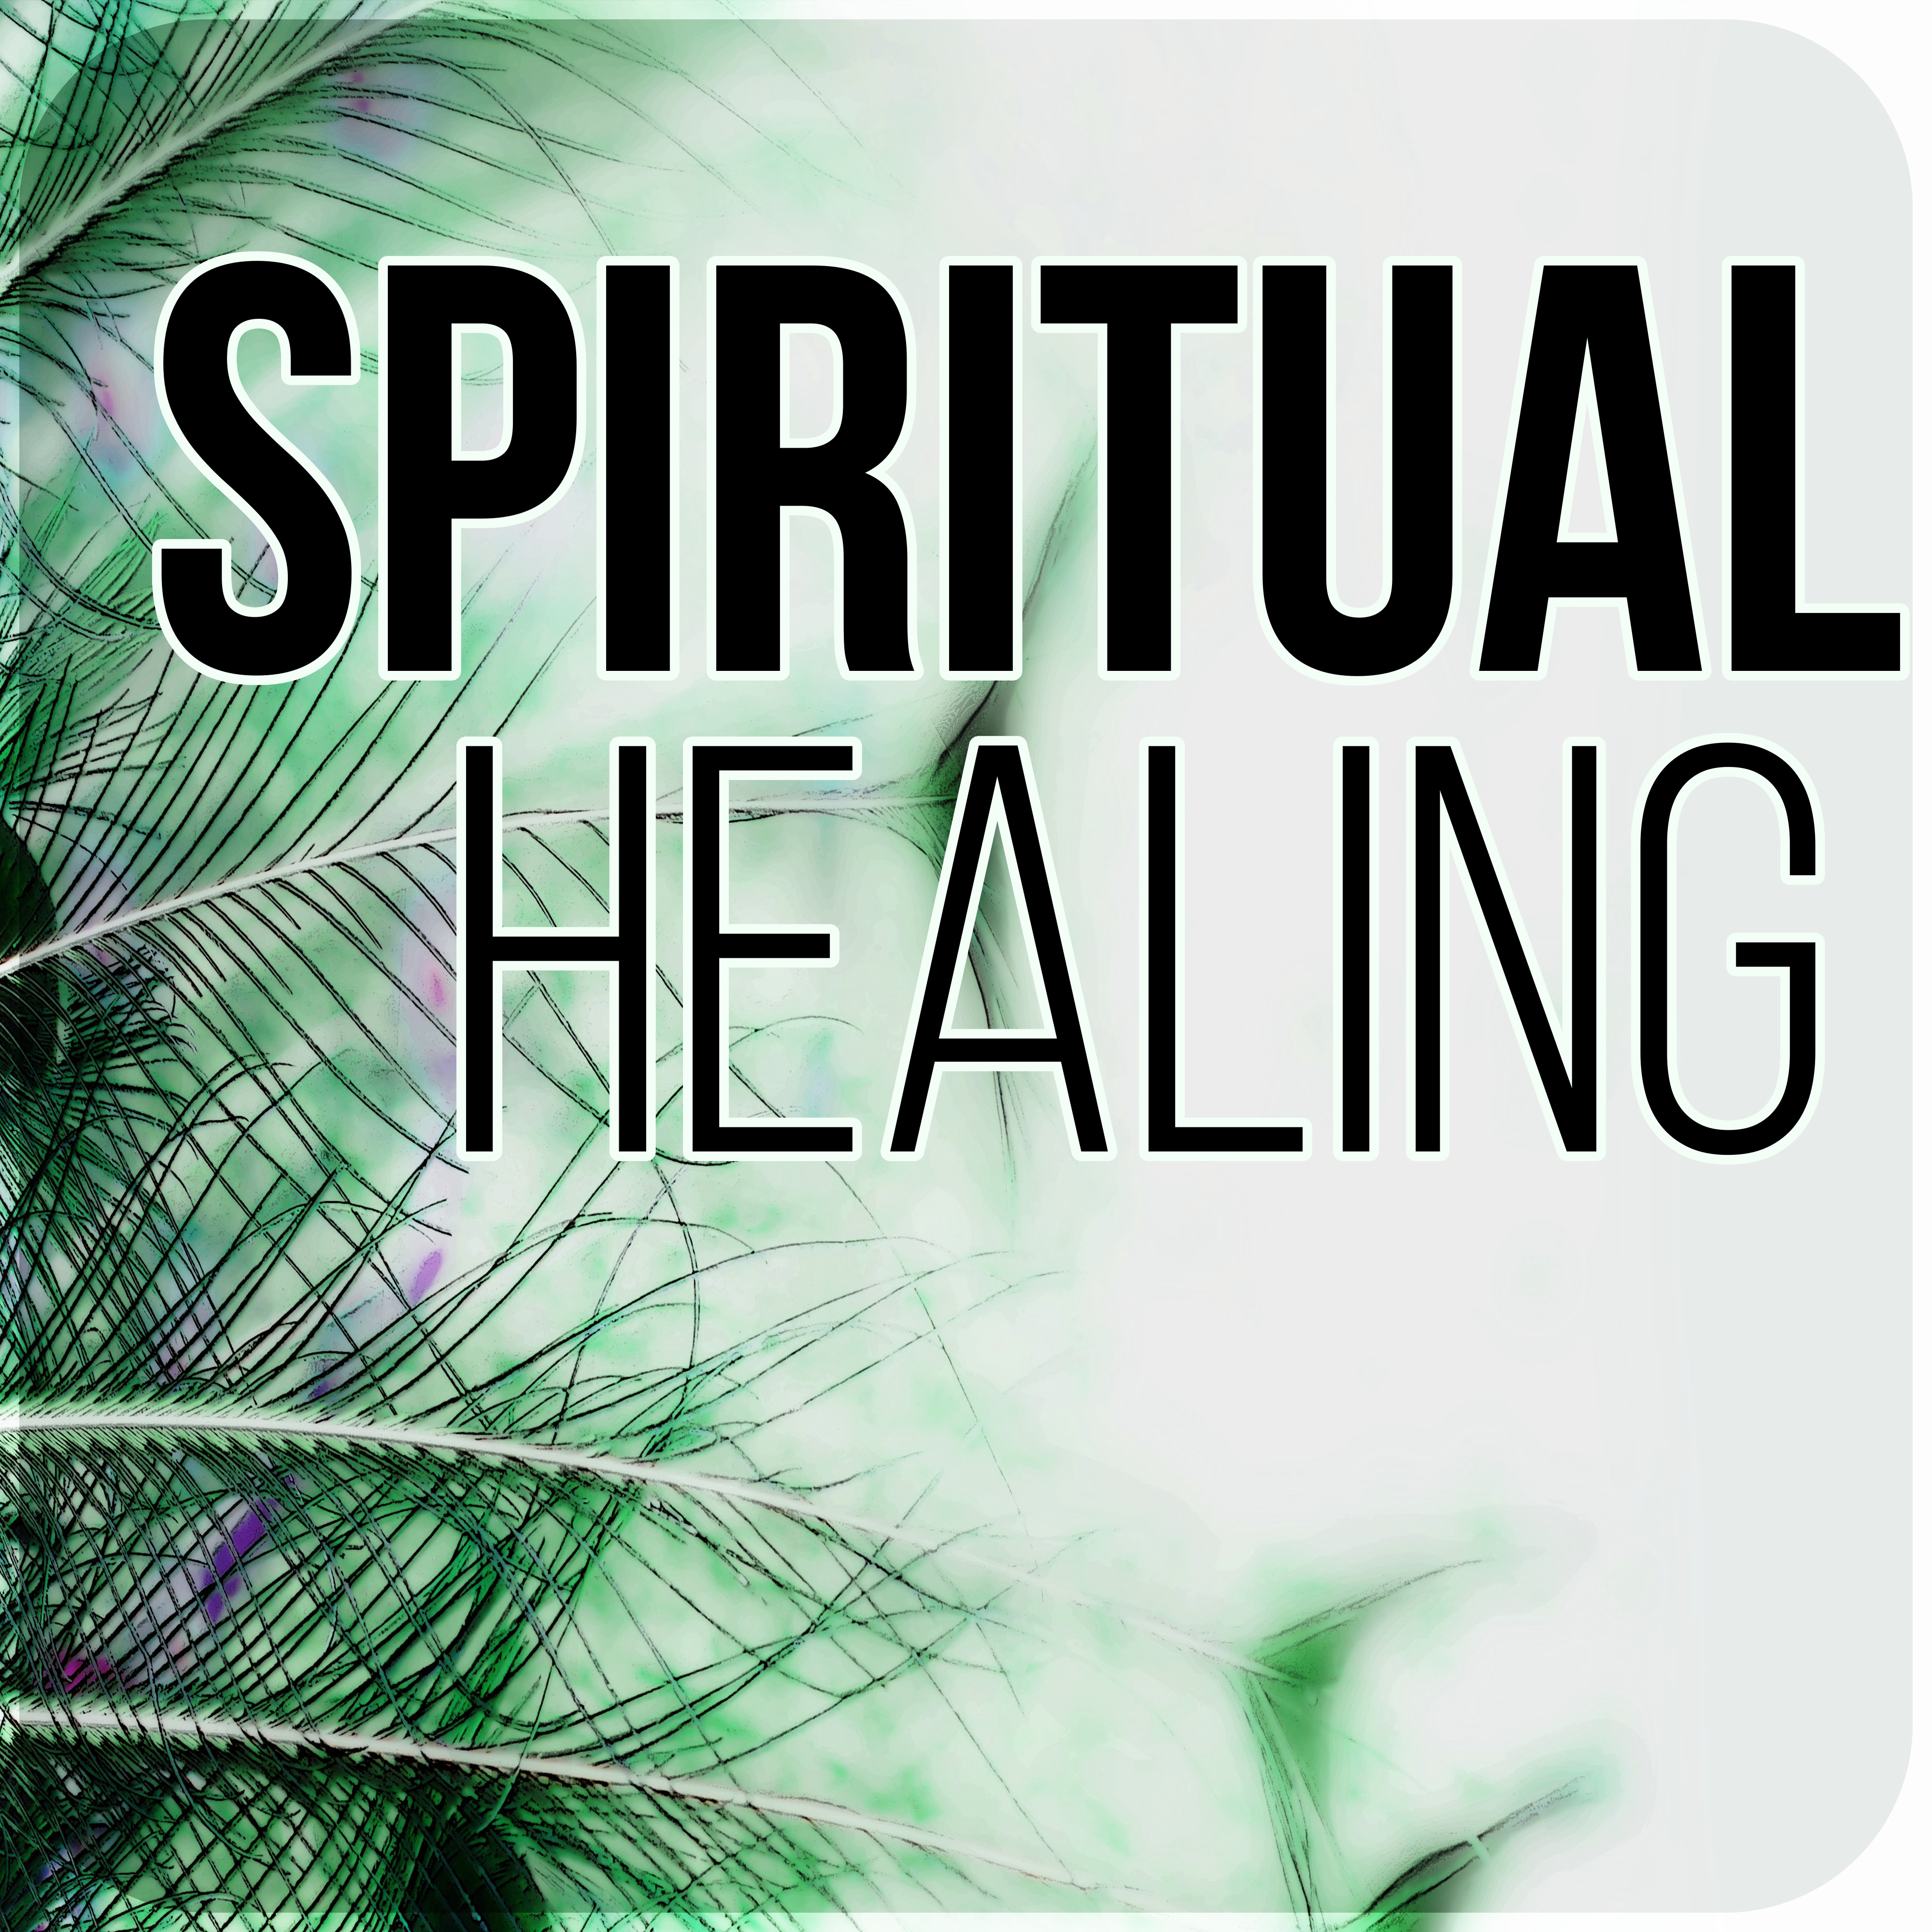 Spiritual Healing - Sounds of Silence, Sweet Dreams with Soothing Music